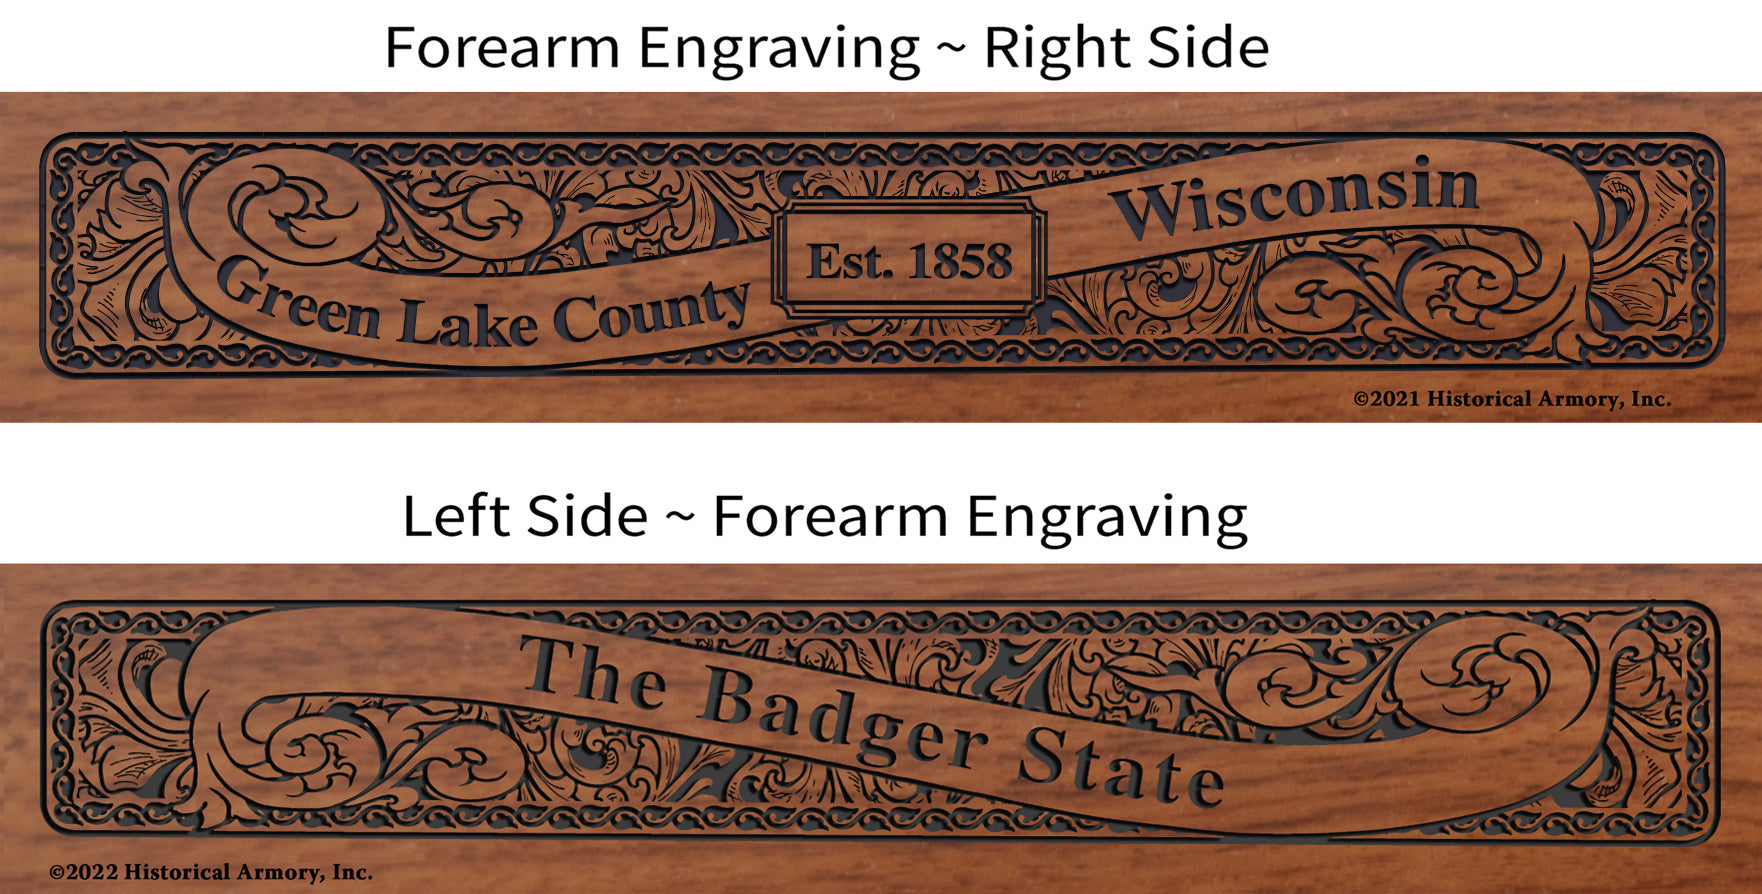 Green Lake County Wisconsin Engraved Rifle Forearm